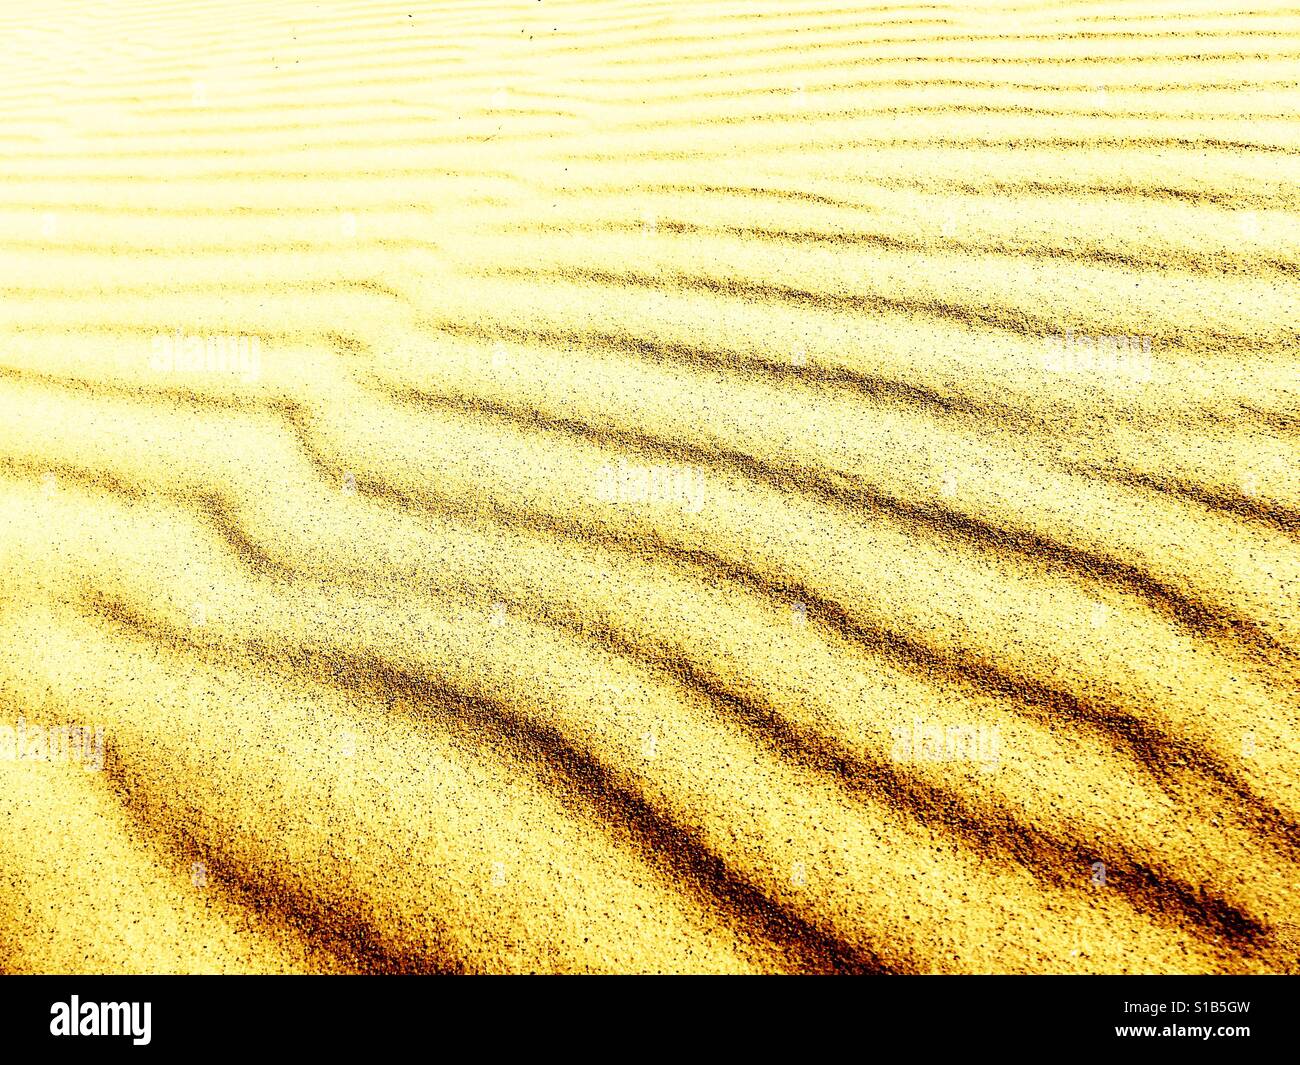 Sand patterns at Kelso Dunes, Mojave National Preserve, California USA Stock Photo